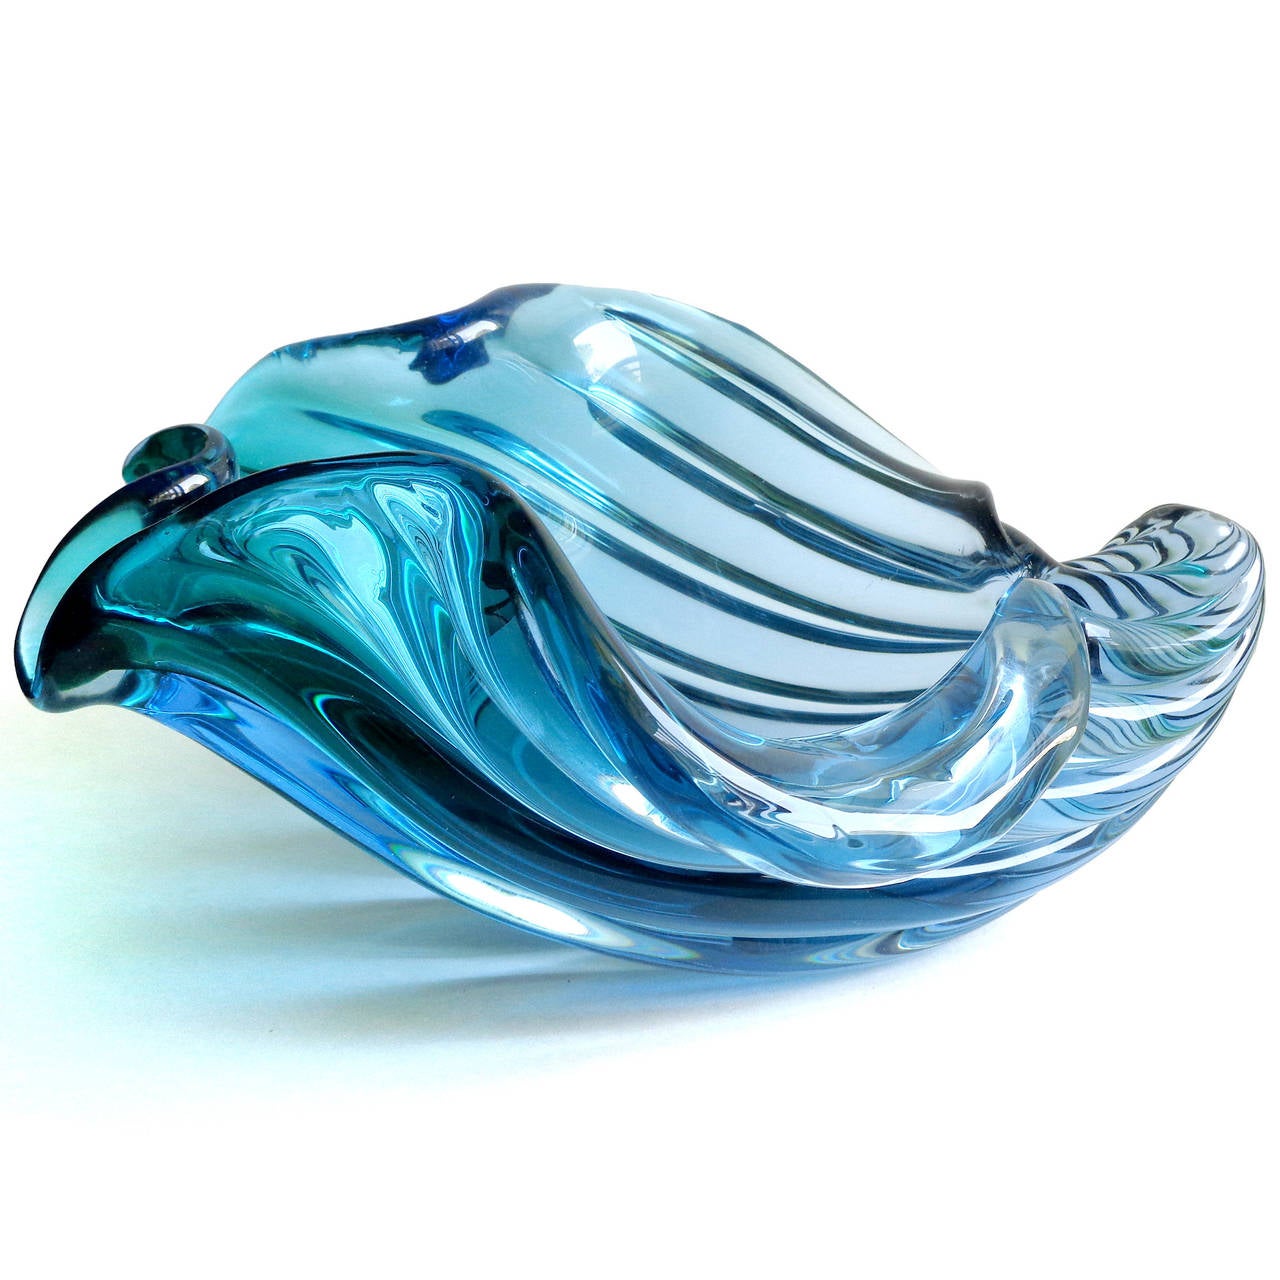 Beautiful large vintage Murano handblown Sommerso blue and aqua Italian art glass centerpiece seashell sculptural bowl. Documented to designer Alfredo Barbini. Published in his catalog. Can be used as a display piece on any table. Use it as a fruit